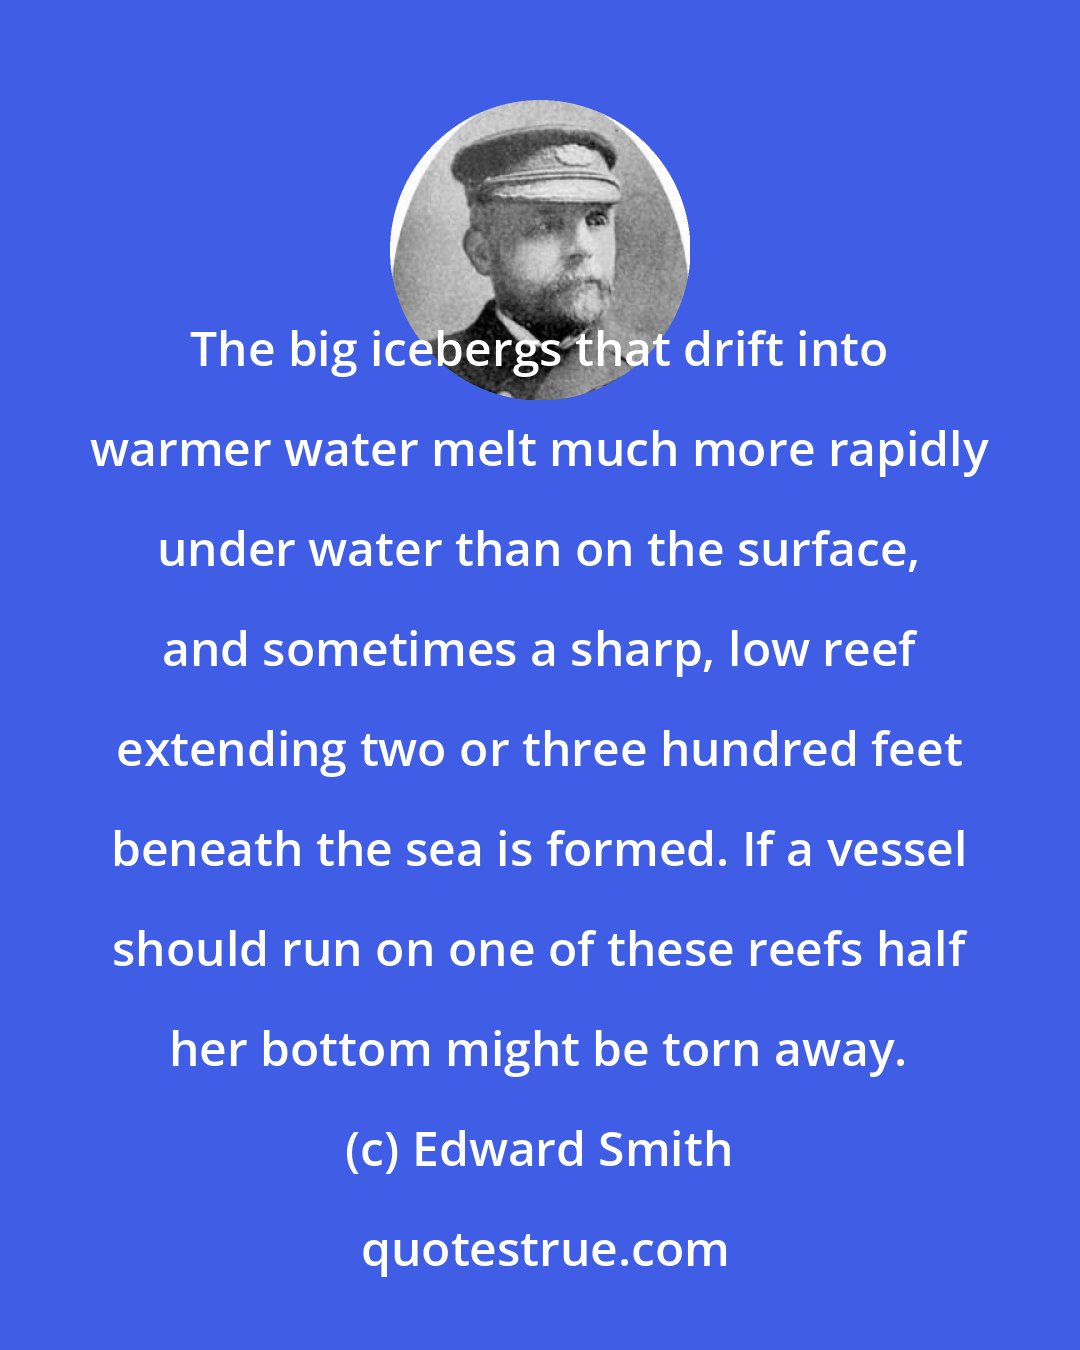 Edward Smith: The big icebergs that drift into warmer water melt much more rapidly under water than on the surface, and sometimes a sharp, low reef extending two or three hundred feet beneath the sea is formed. If a vessel should run on one of these reefs half her bottom might be torn away.